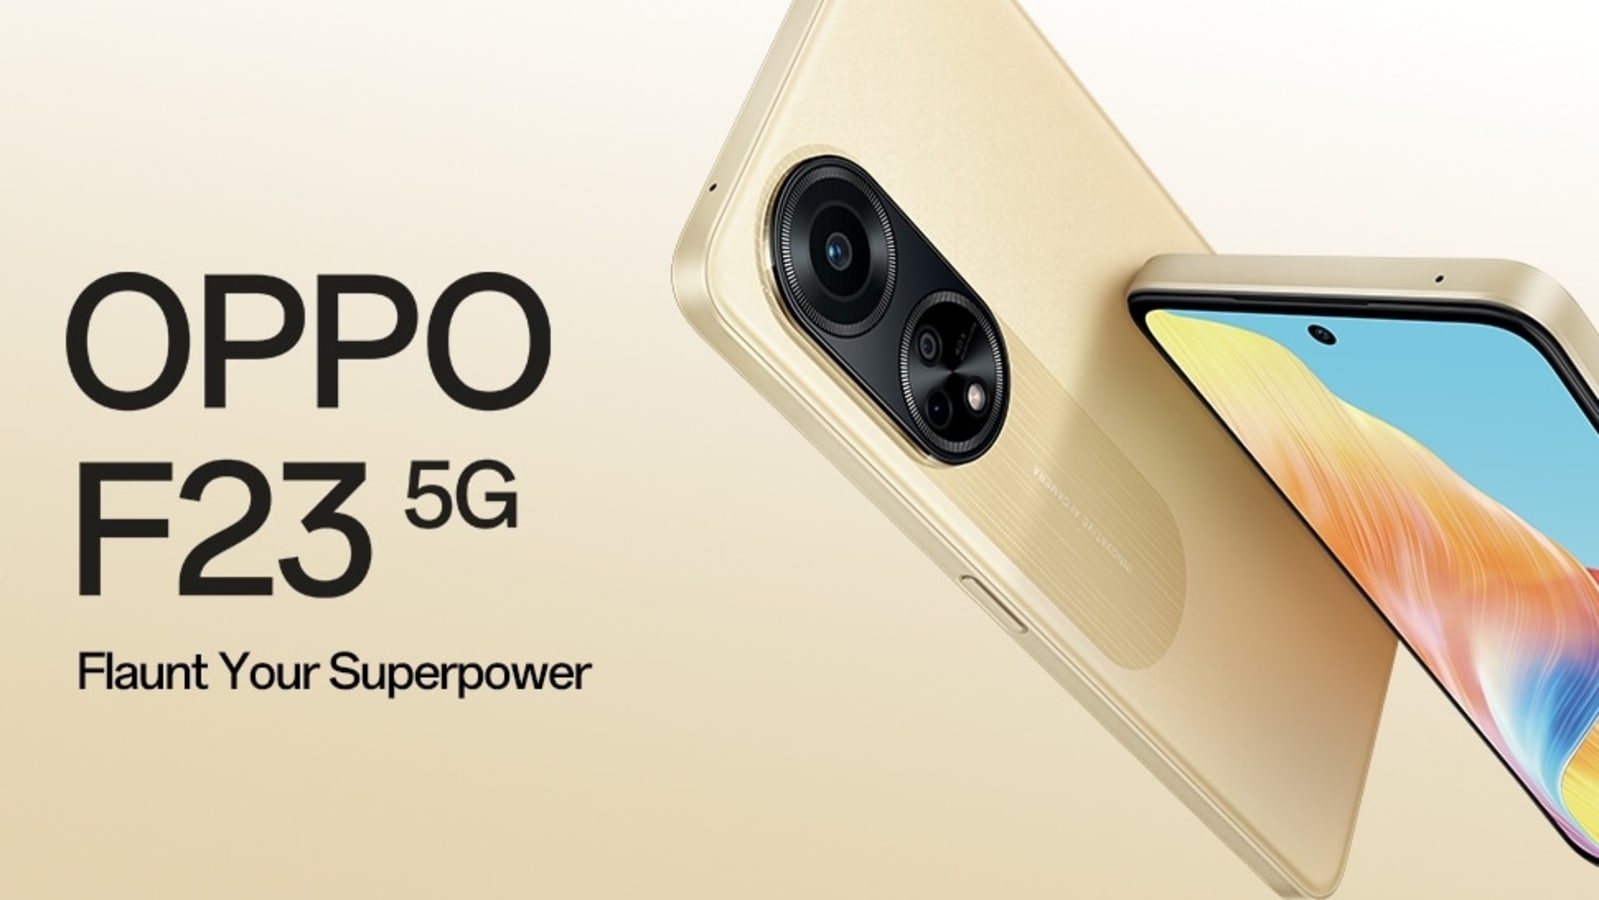 Oppo A78 5G with MediaTek Dimensity 700 SoC and 50MP Camera